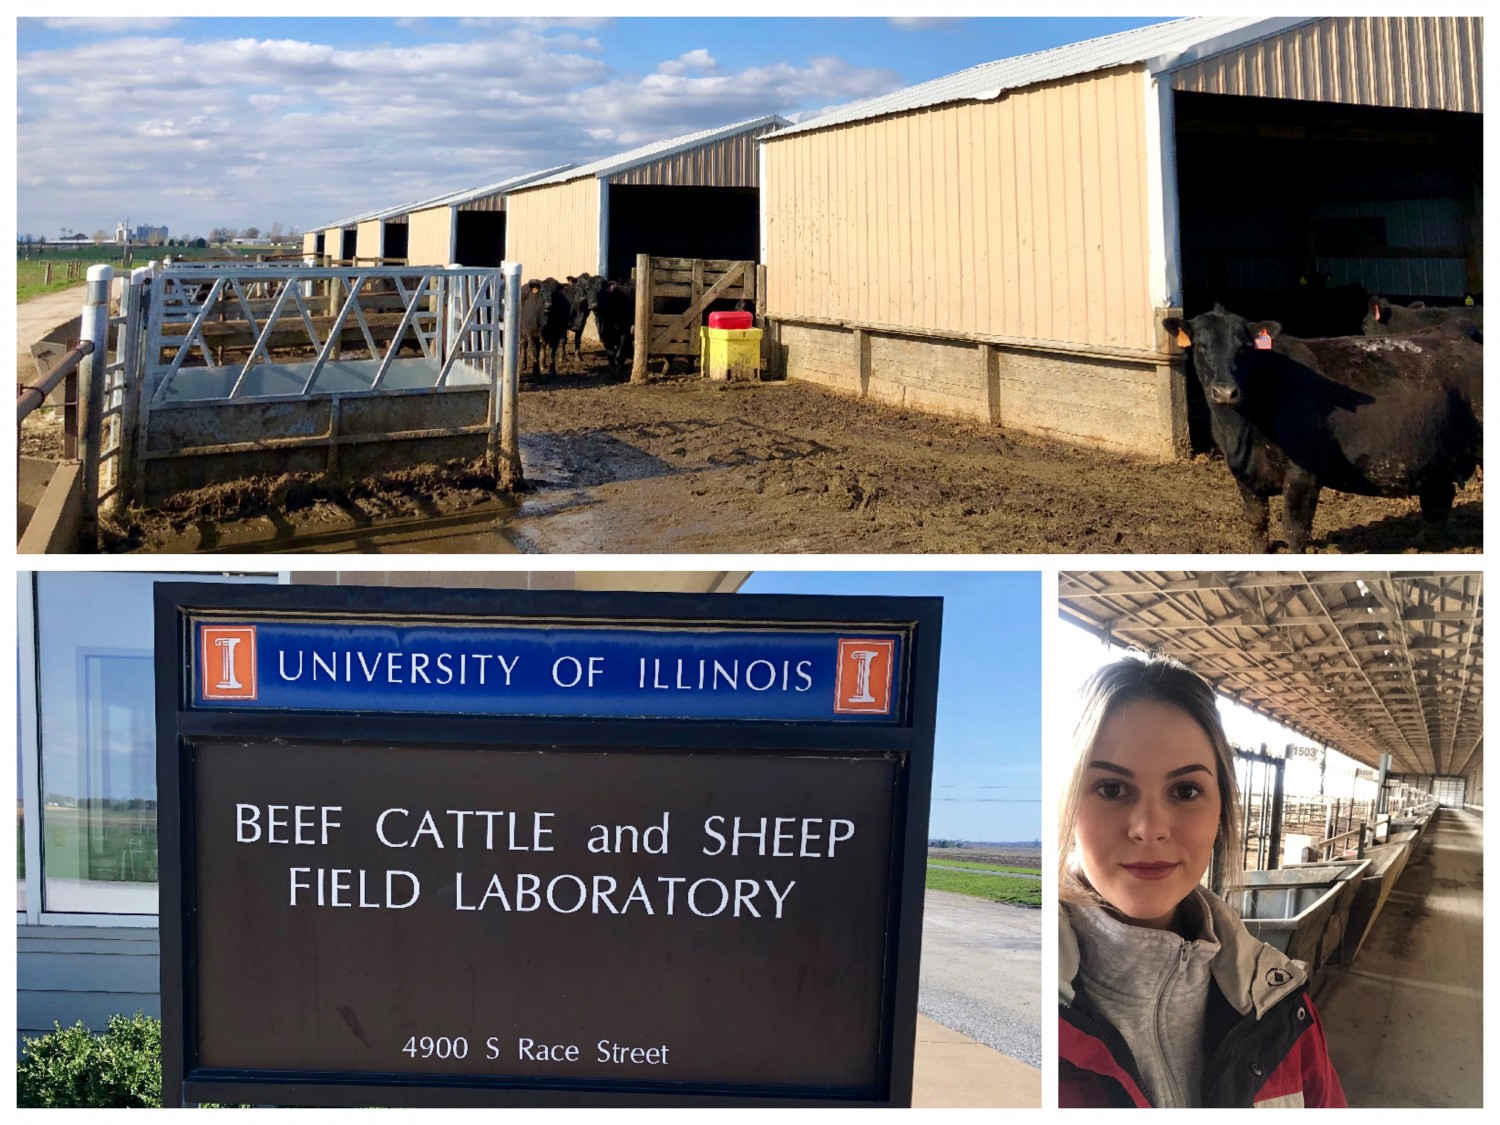 Collage of Molly, Beef Cattle and Sheep Field Laboratory sign, and beef cattle in a barn lot